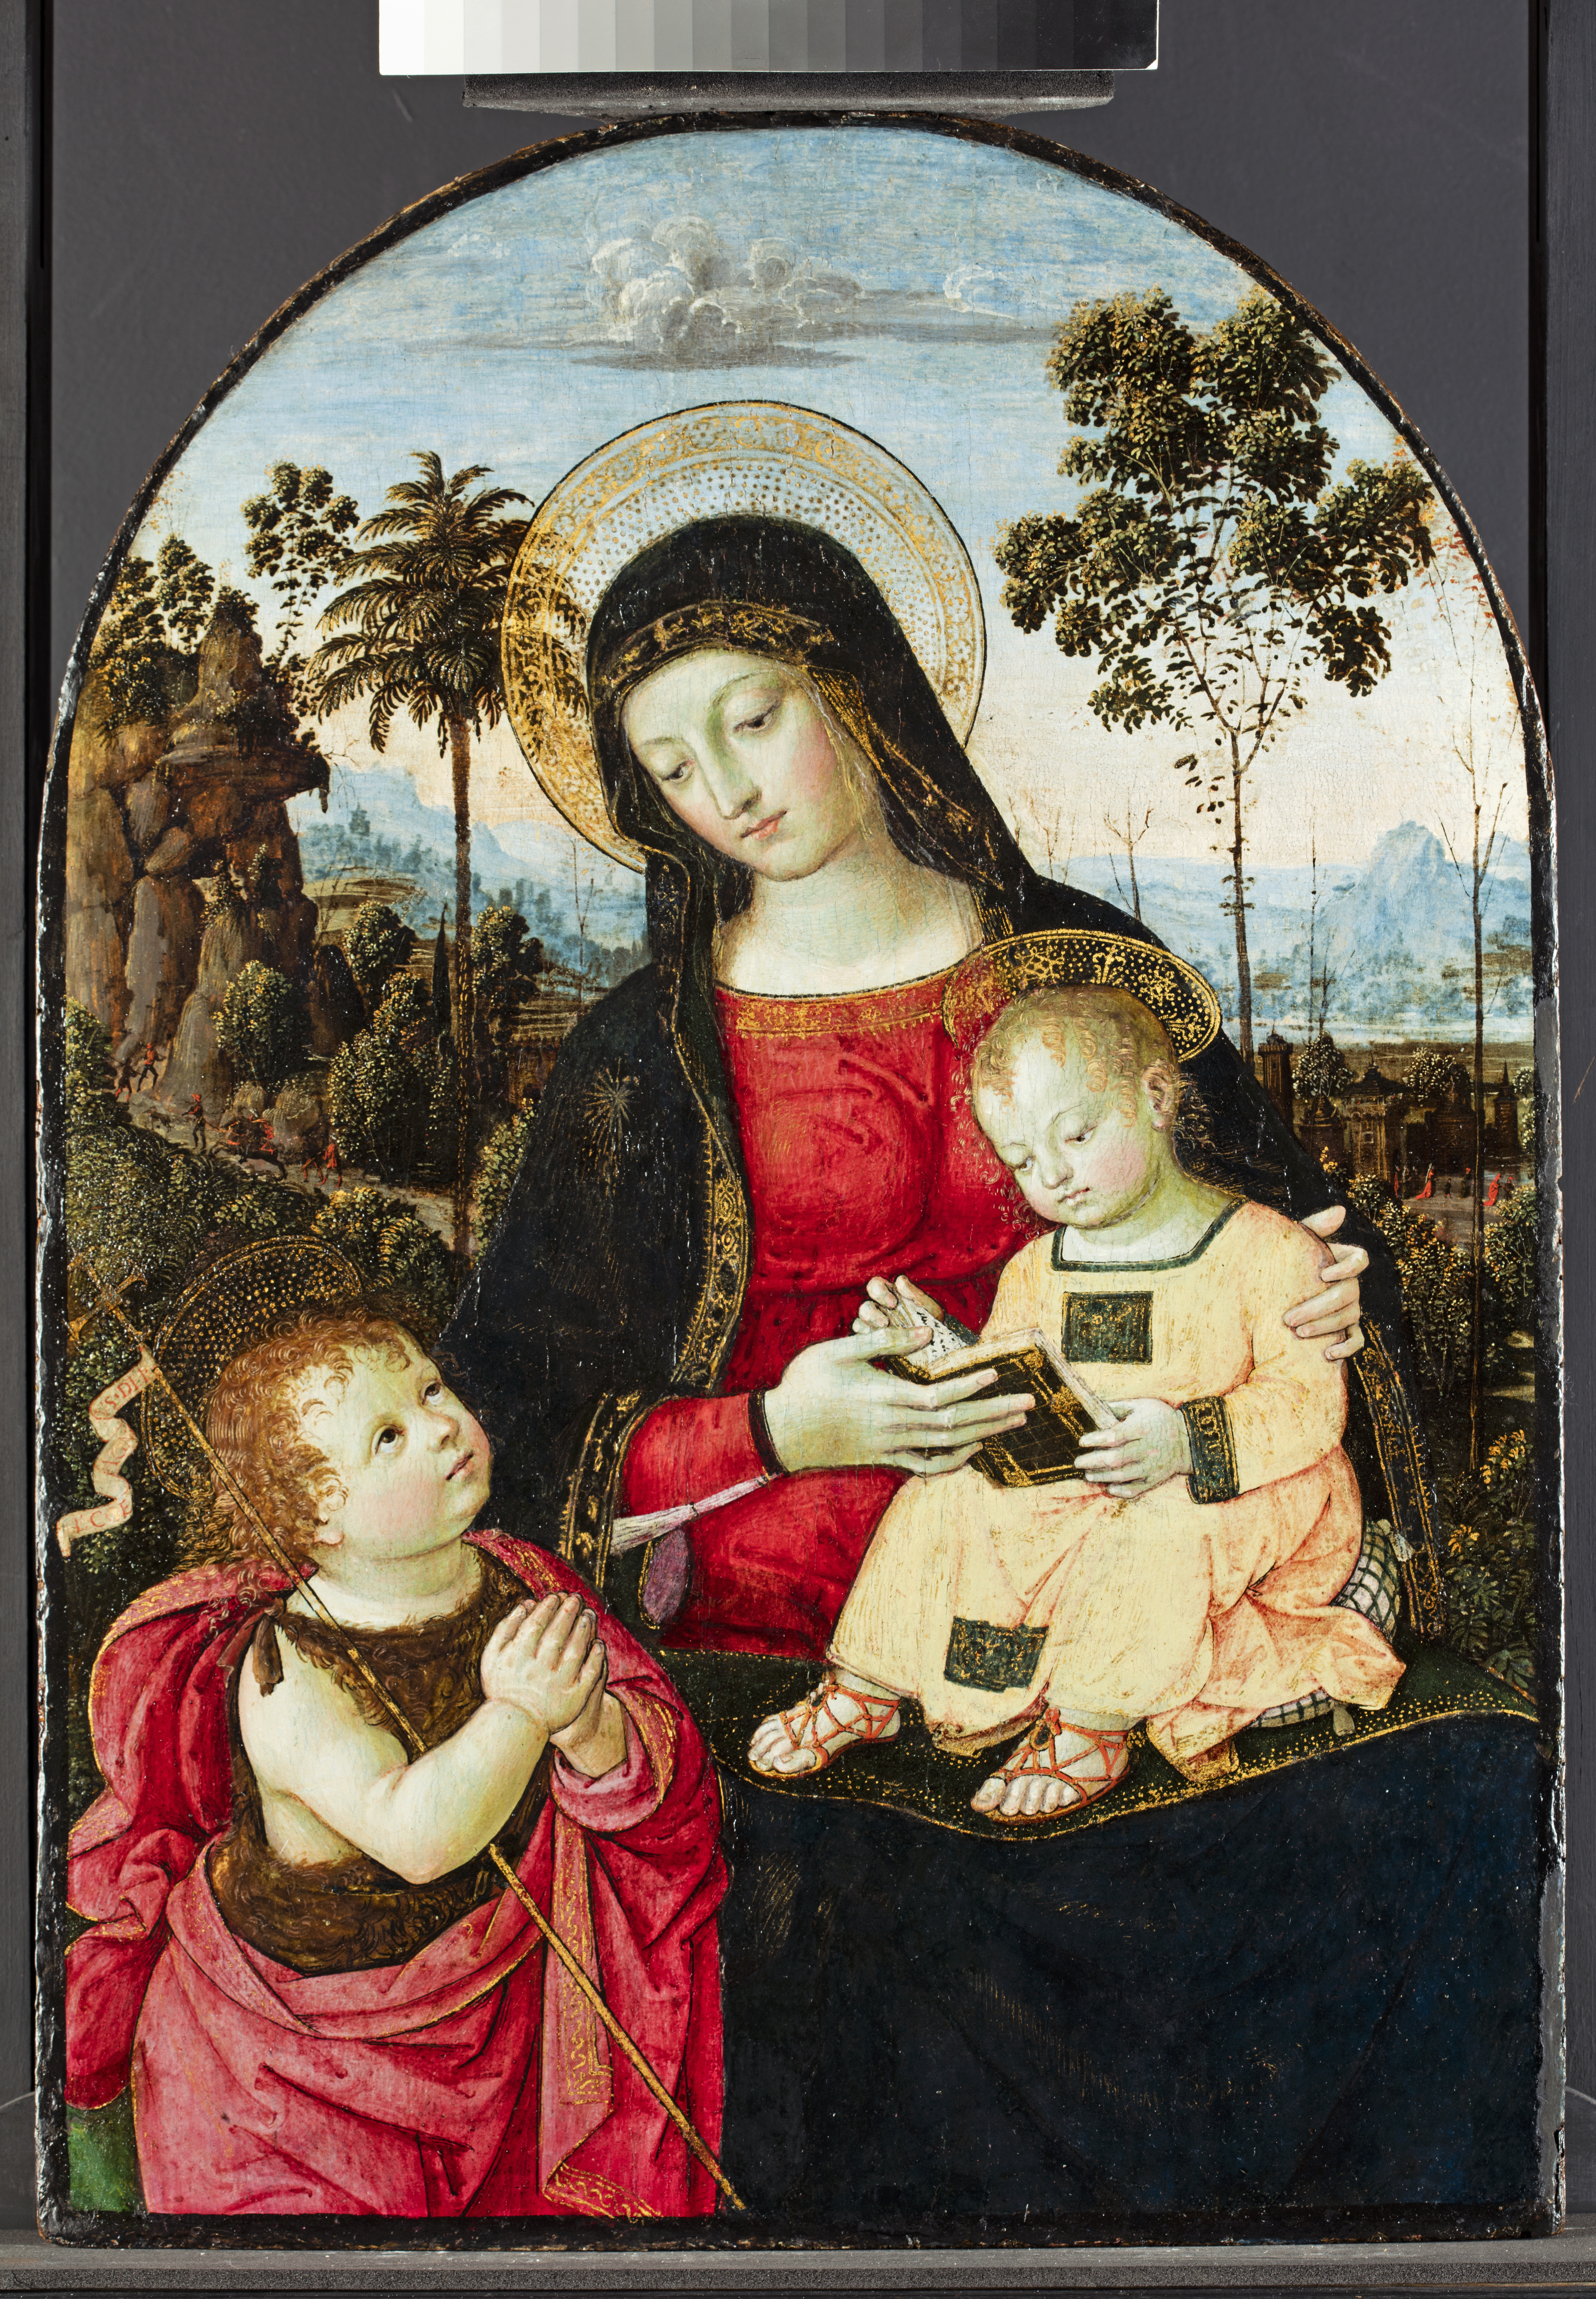 Fig. 7 Virgin and Child after treatment: Virgin and Child (©Titmus)